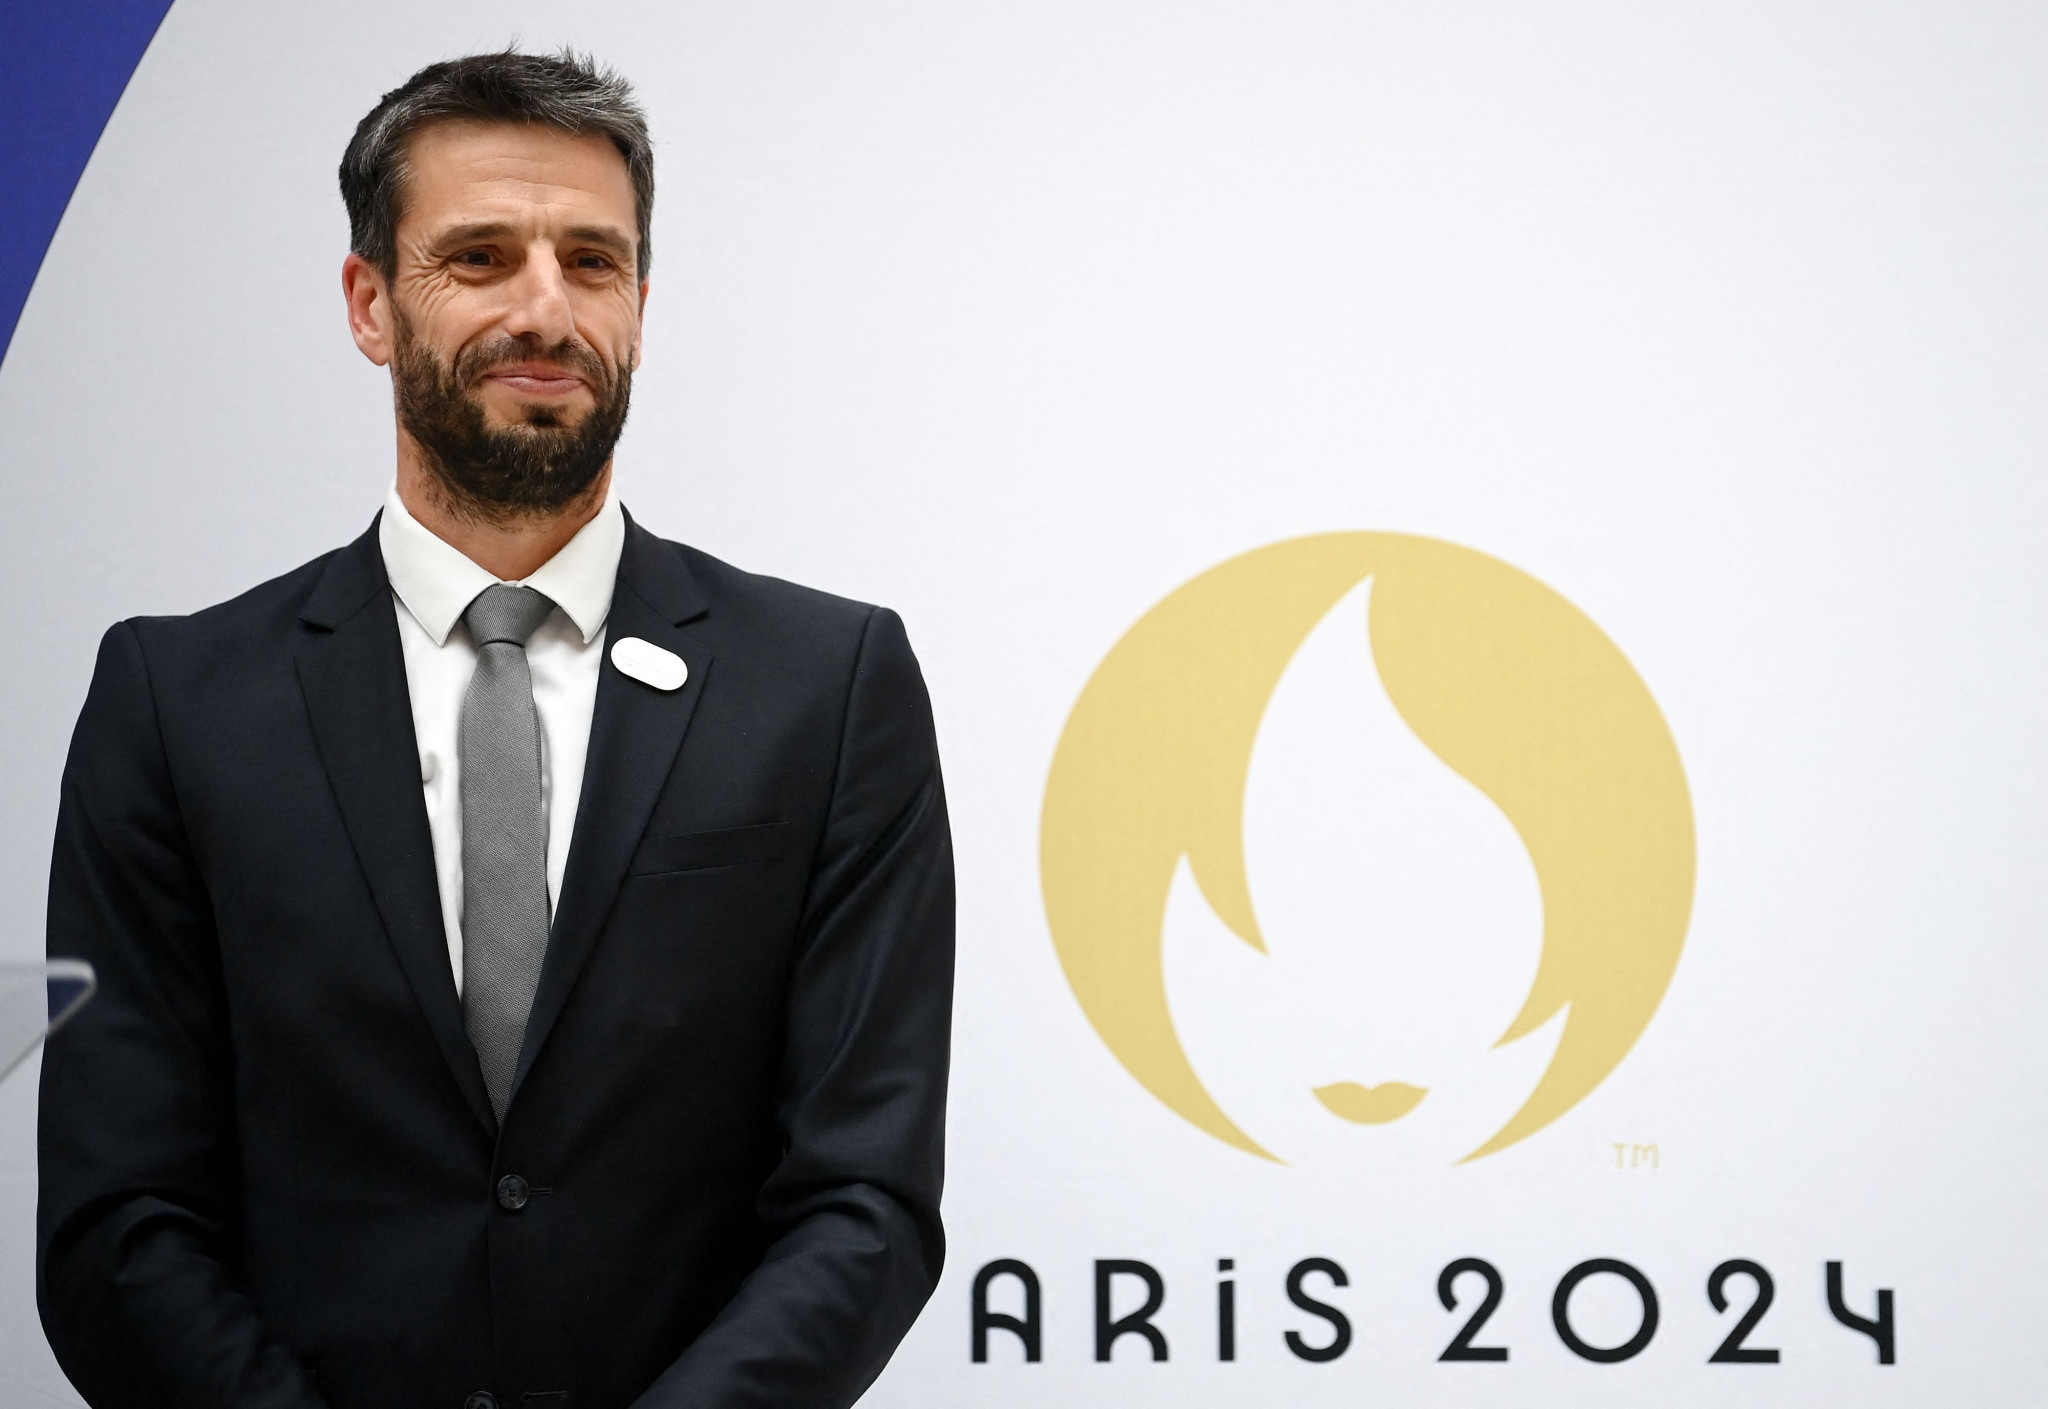 Paris 2024 President Tony Estanguet is among the speakers at this year's Global Sports Week where he is expected to give an update on preparations for the Olympics and Paralympics ©Getty Images